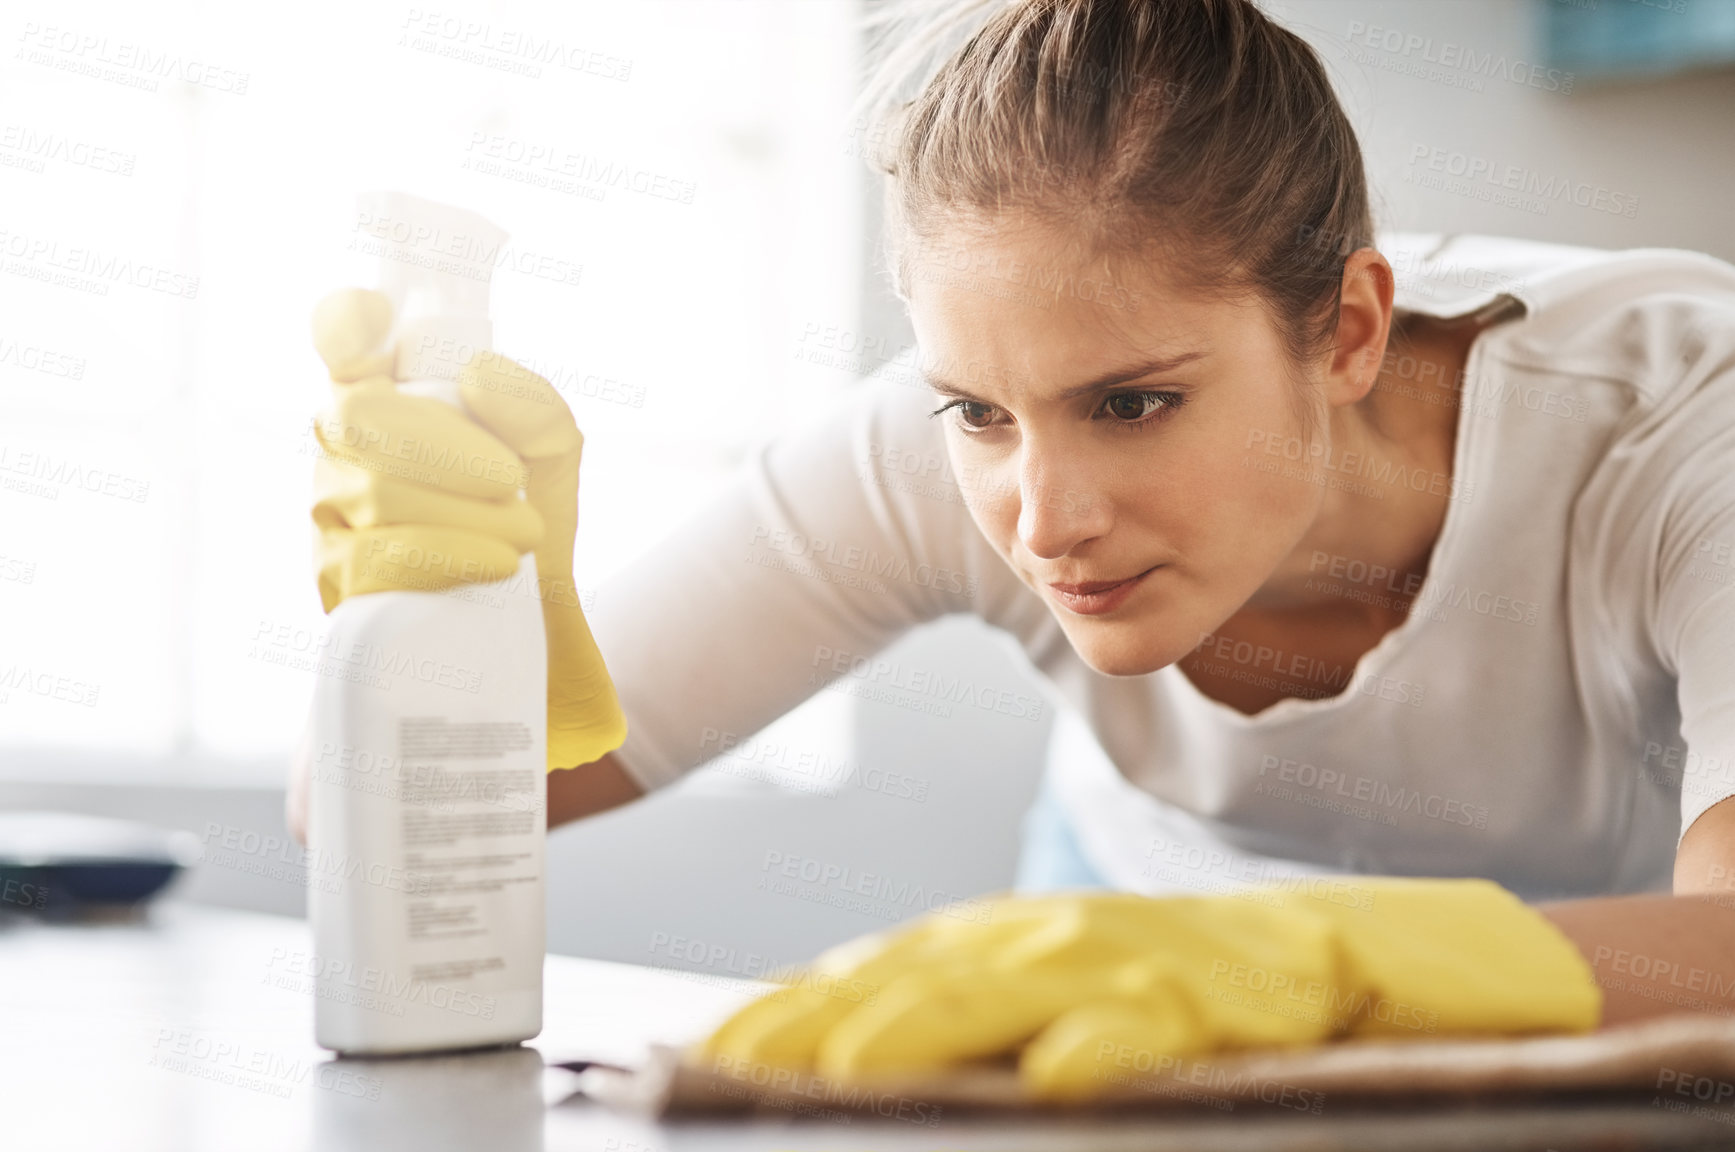 Buy stock photo Cropped shot of a young woman cleaning her home